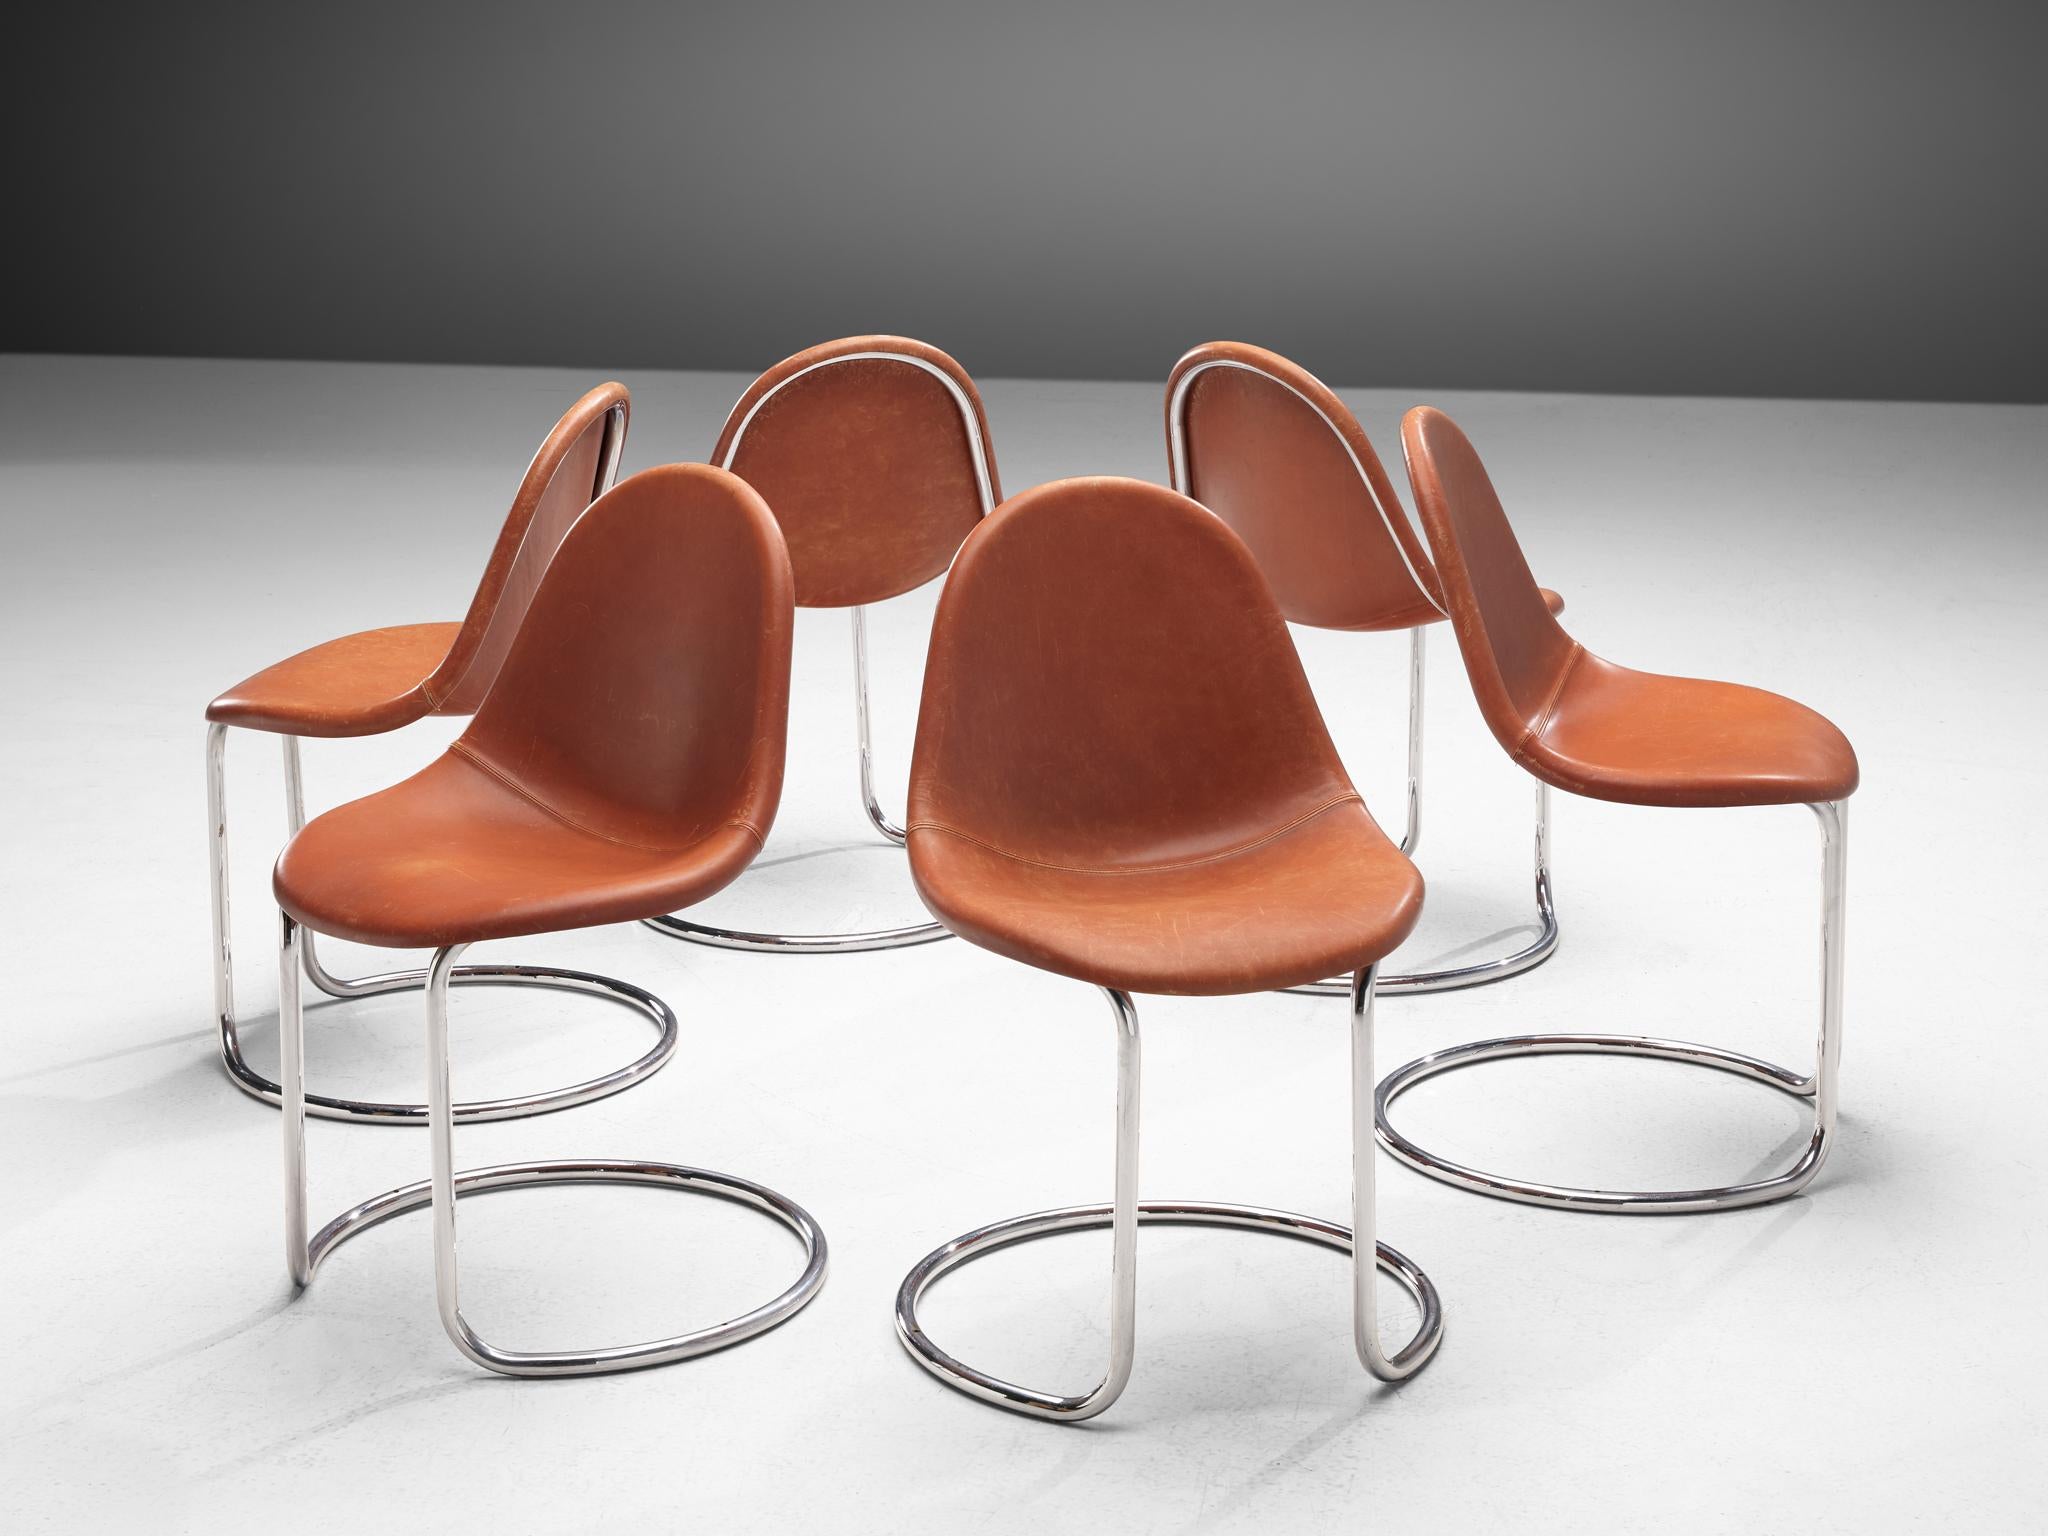 Giotto Stoppino for Bernini, set of six 'Maya' chairs, leather and chromed steel, Italy, 1969.

A set of six cognac leather 'Maya' chairs by Giotto Stoppino, manufactured by Bernini. The chairs feature a moulded shell covered with leather. The